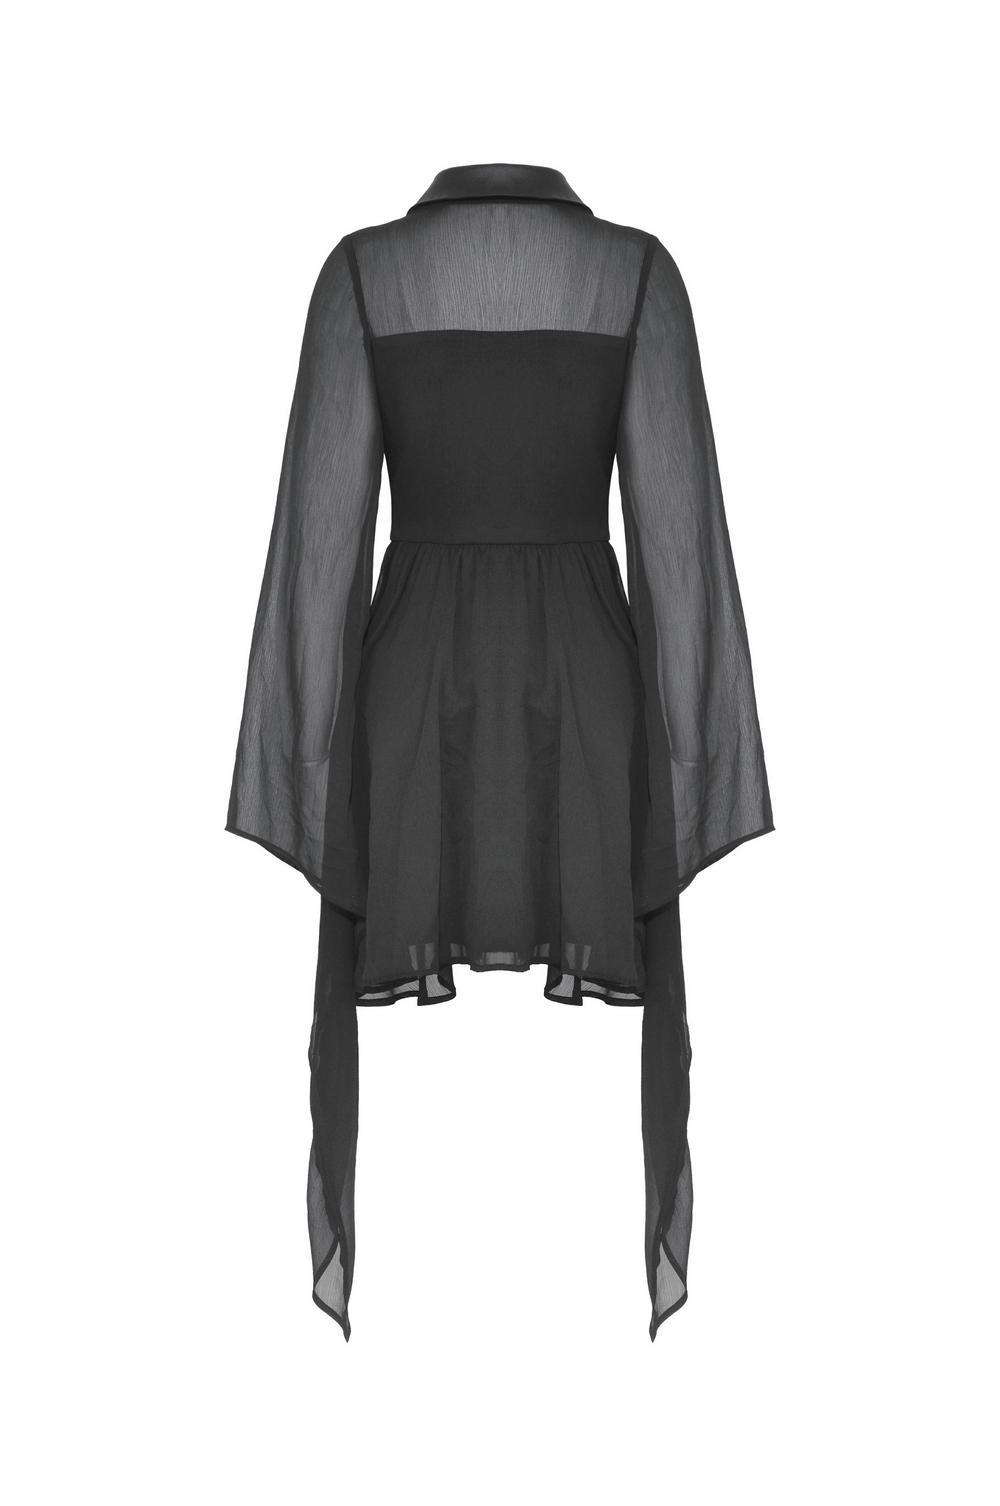 Gothic Black Dress With Lace-Up Detail And Flowy Sleeves